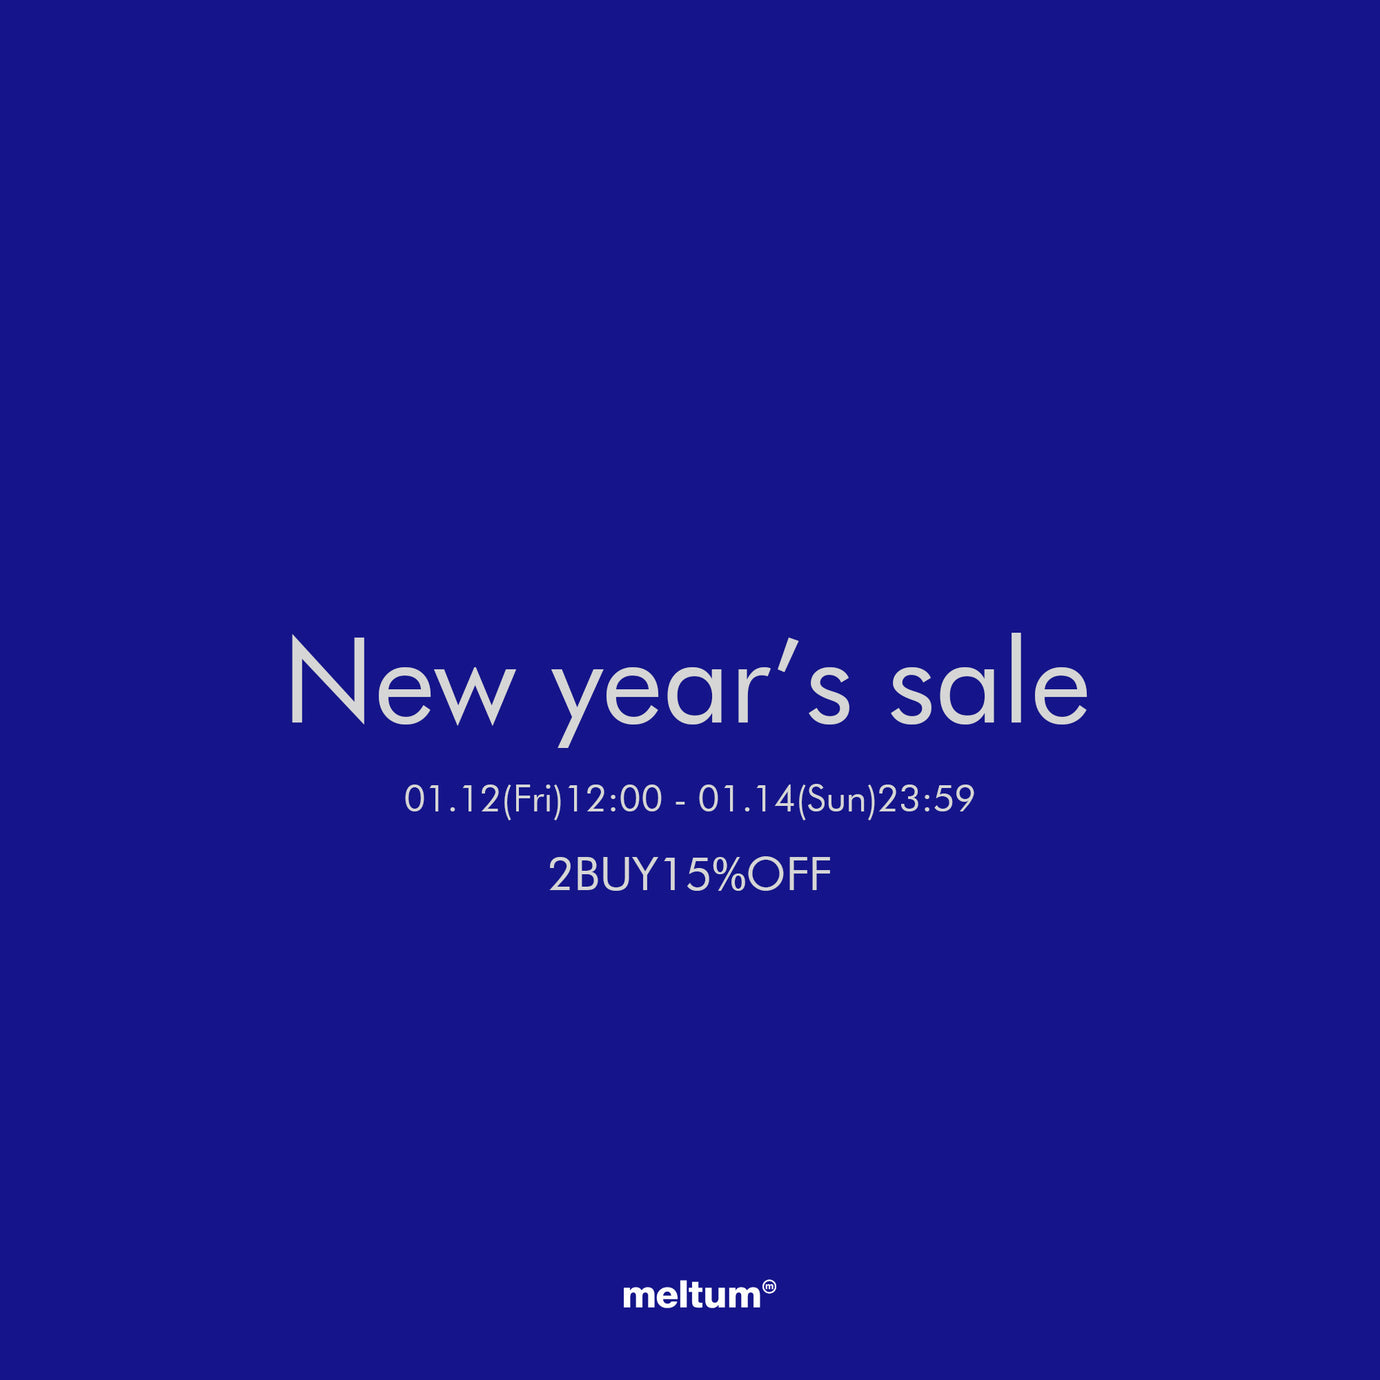 New year’s sale